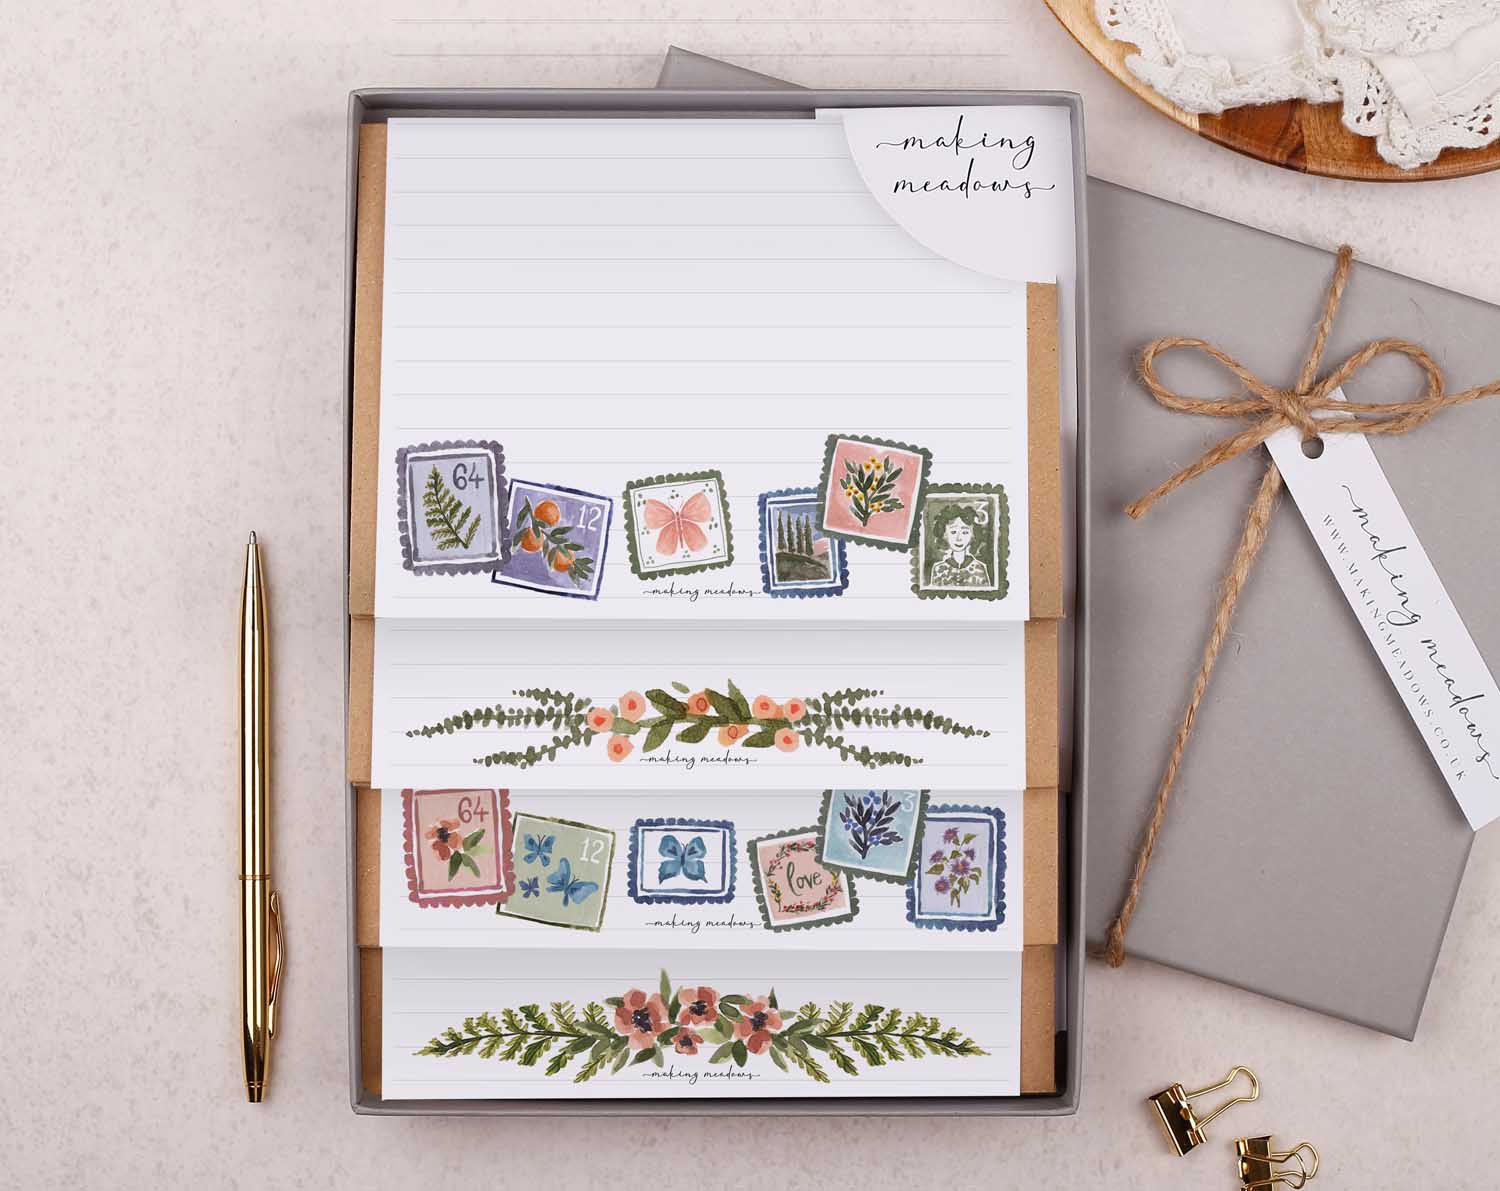 32 sheets of floral stamp design writing paper in a gift box set.